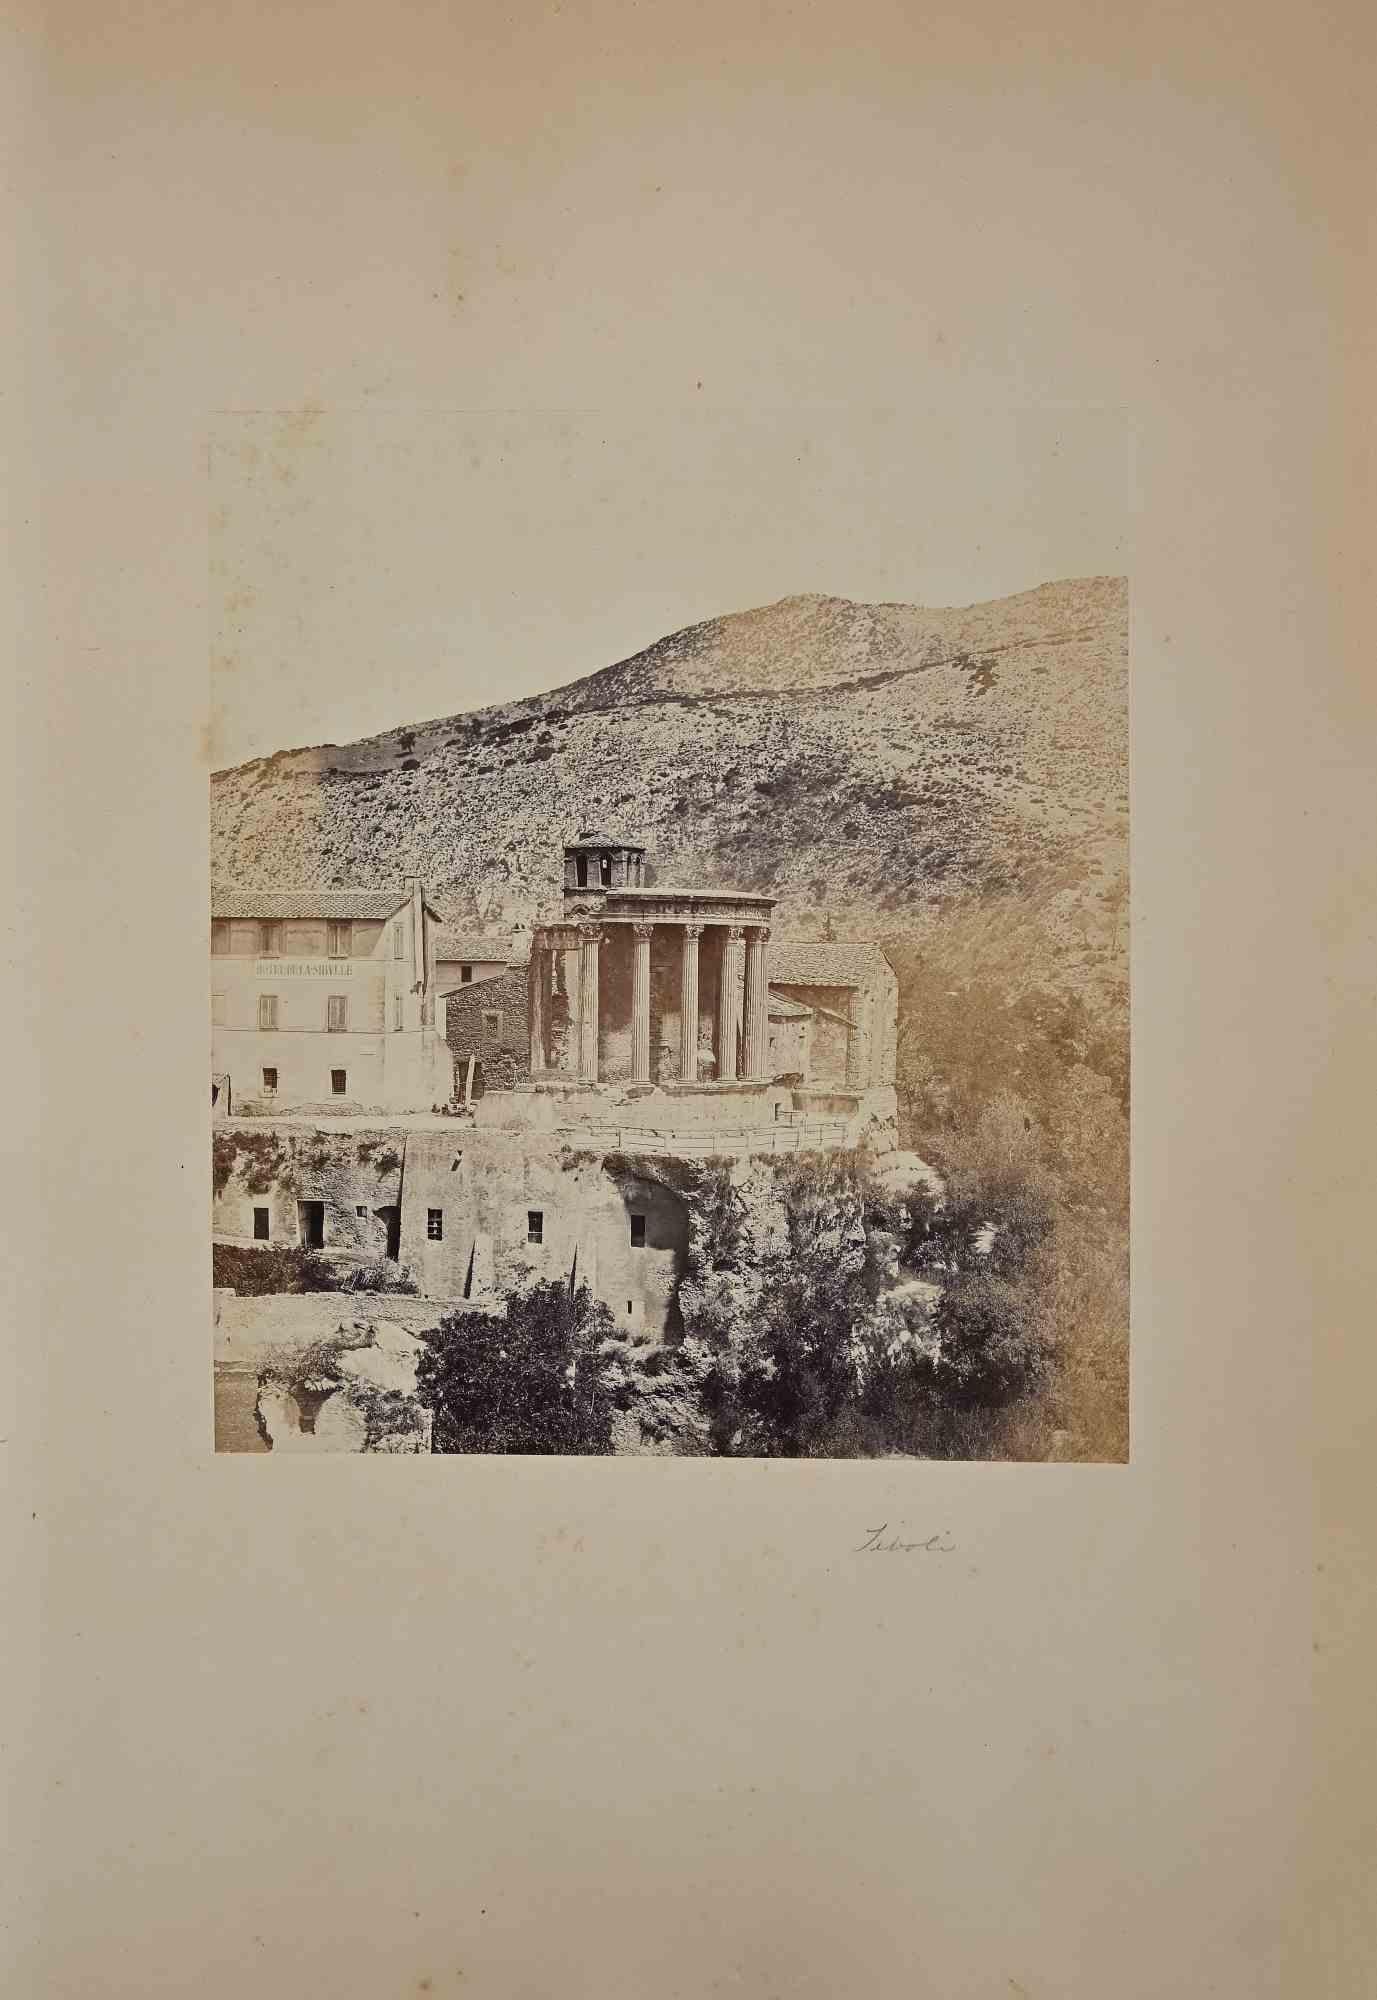 Unknown Figurative Photograph - View of the Ancient Tivoli - Silver Salt Photograph - Early 20th Century